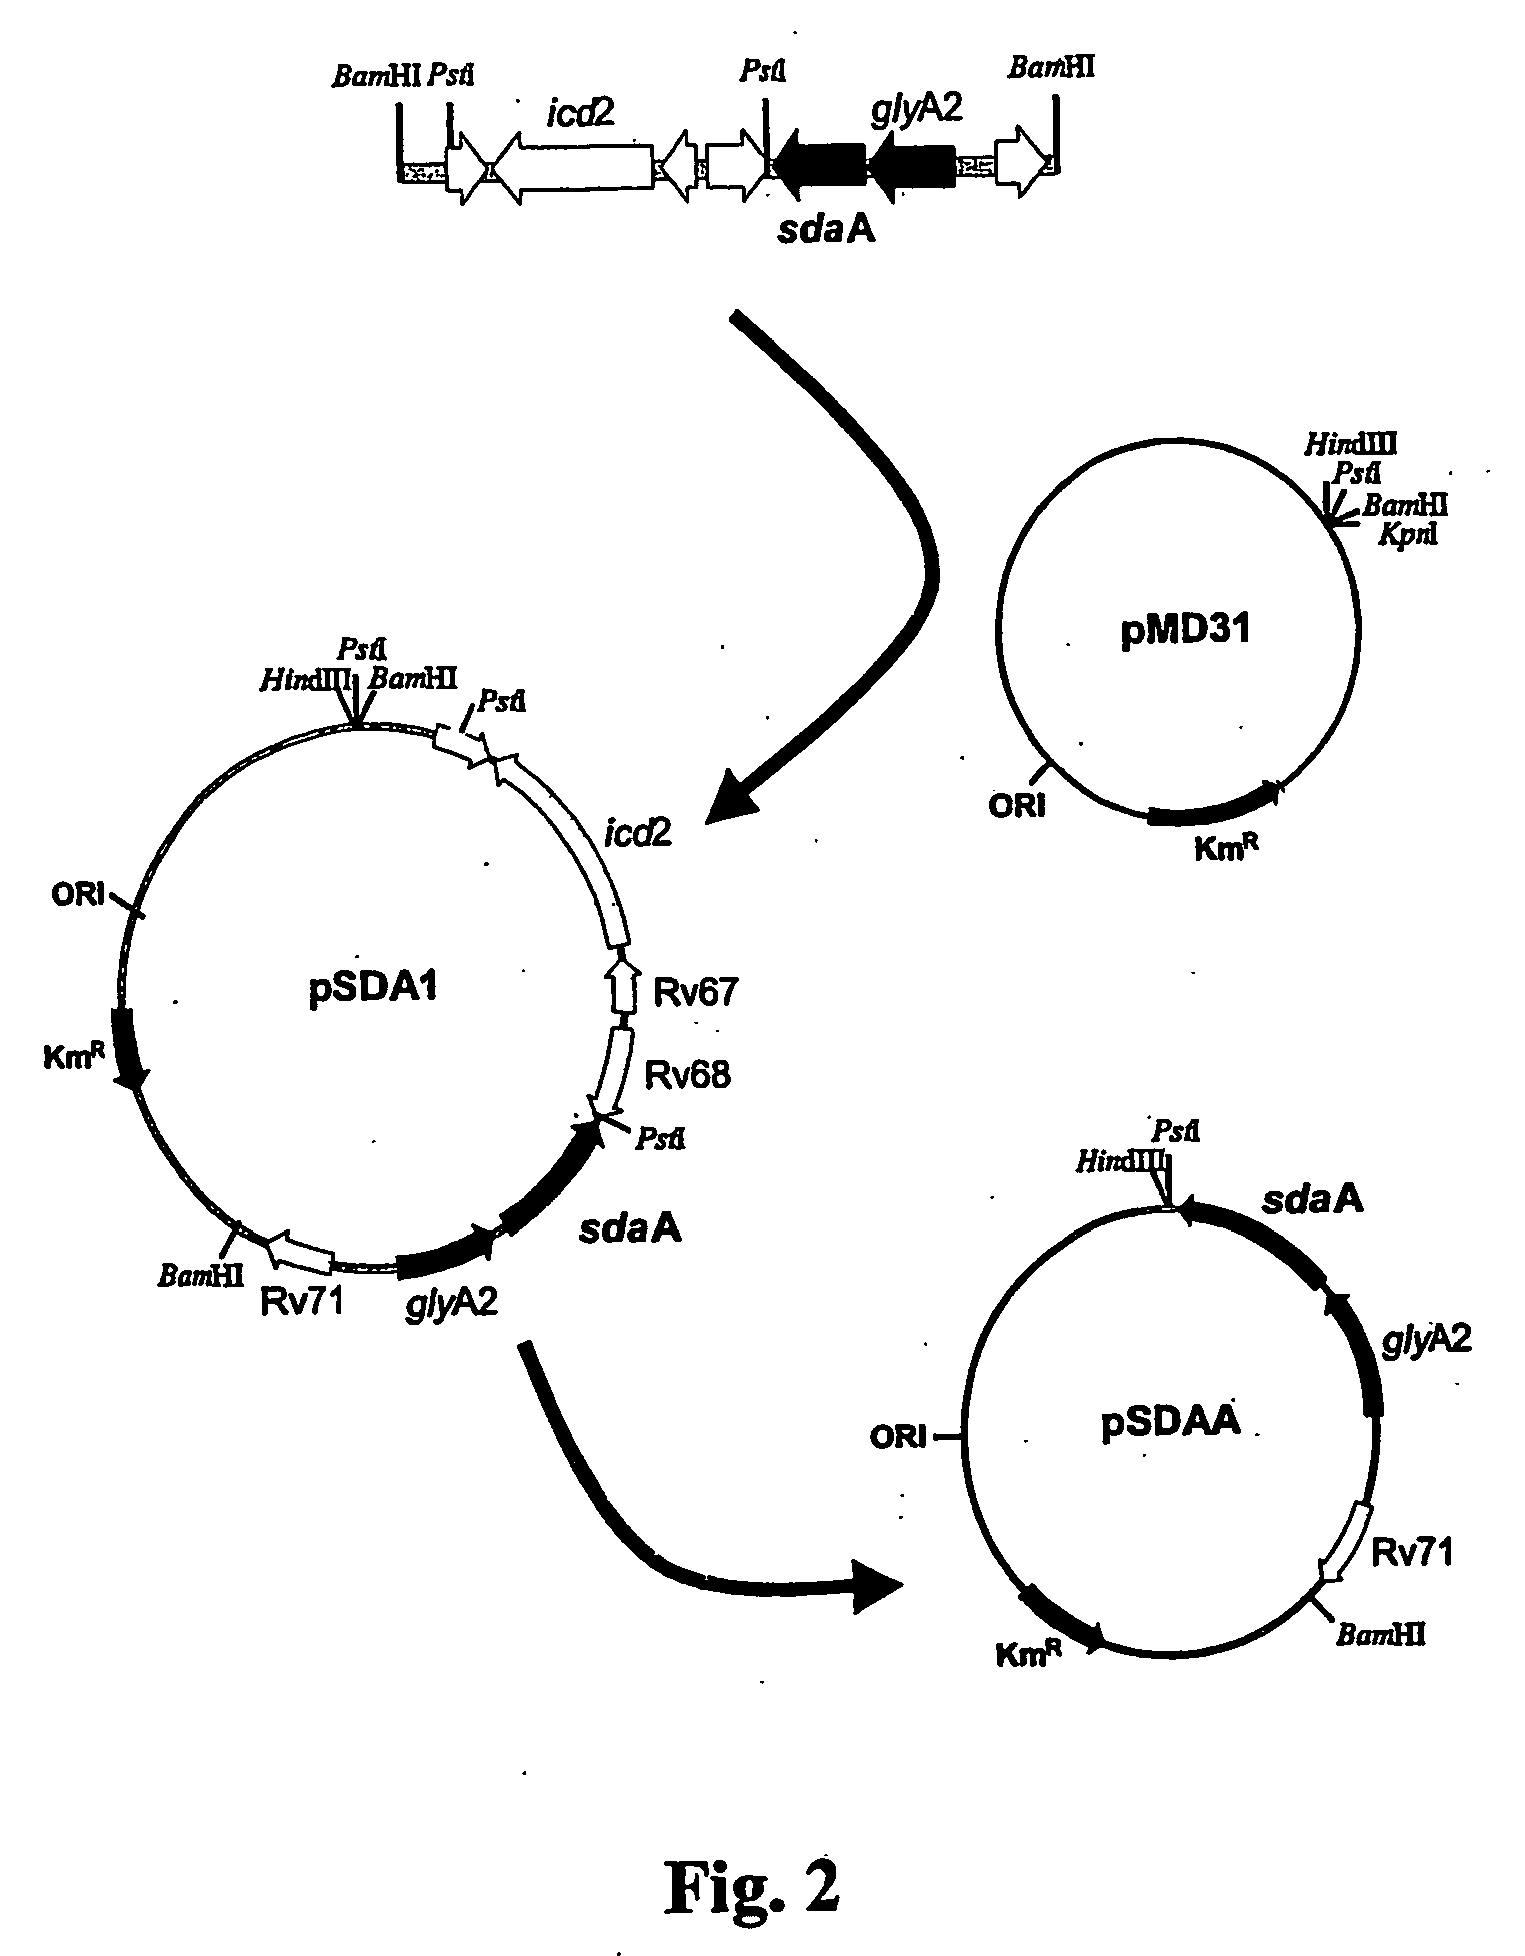 Tuberculosis Vaccines Including Recombinant BCG Strains Expressing Alanine Dehydrogenase, Serine Dehydratase and/or Glutamine Synthetase